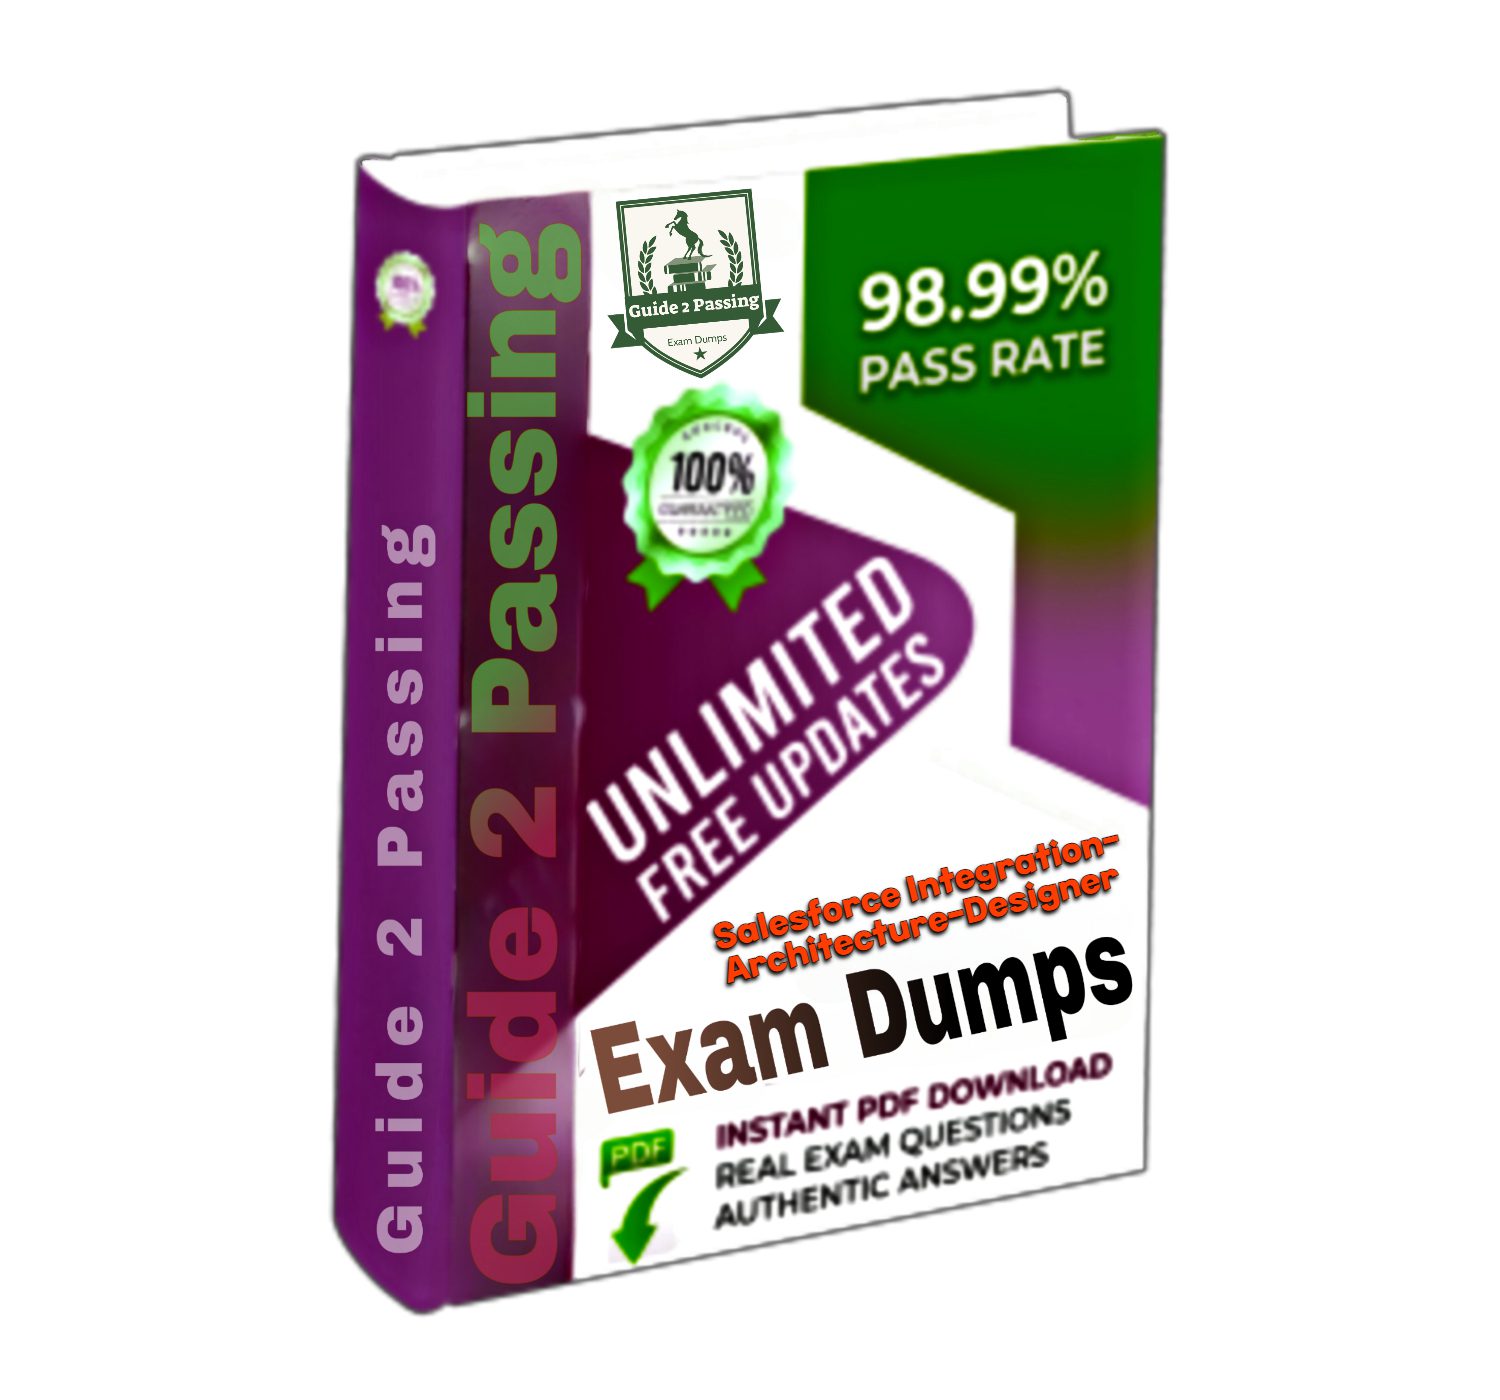 Pass Your Salesforce Integration-Architecture-Designer Exam Dumps From Guide 2 Passing